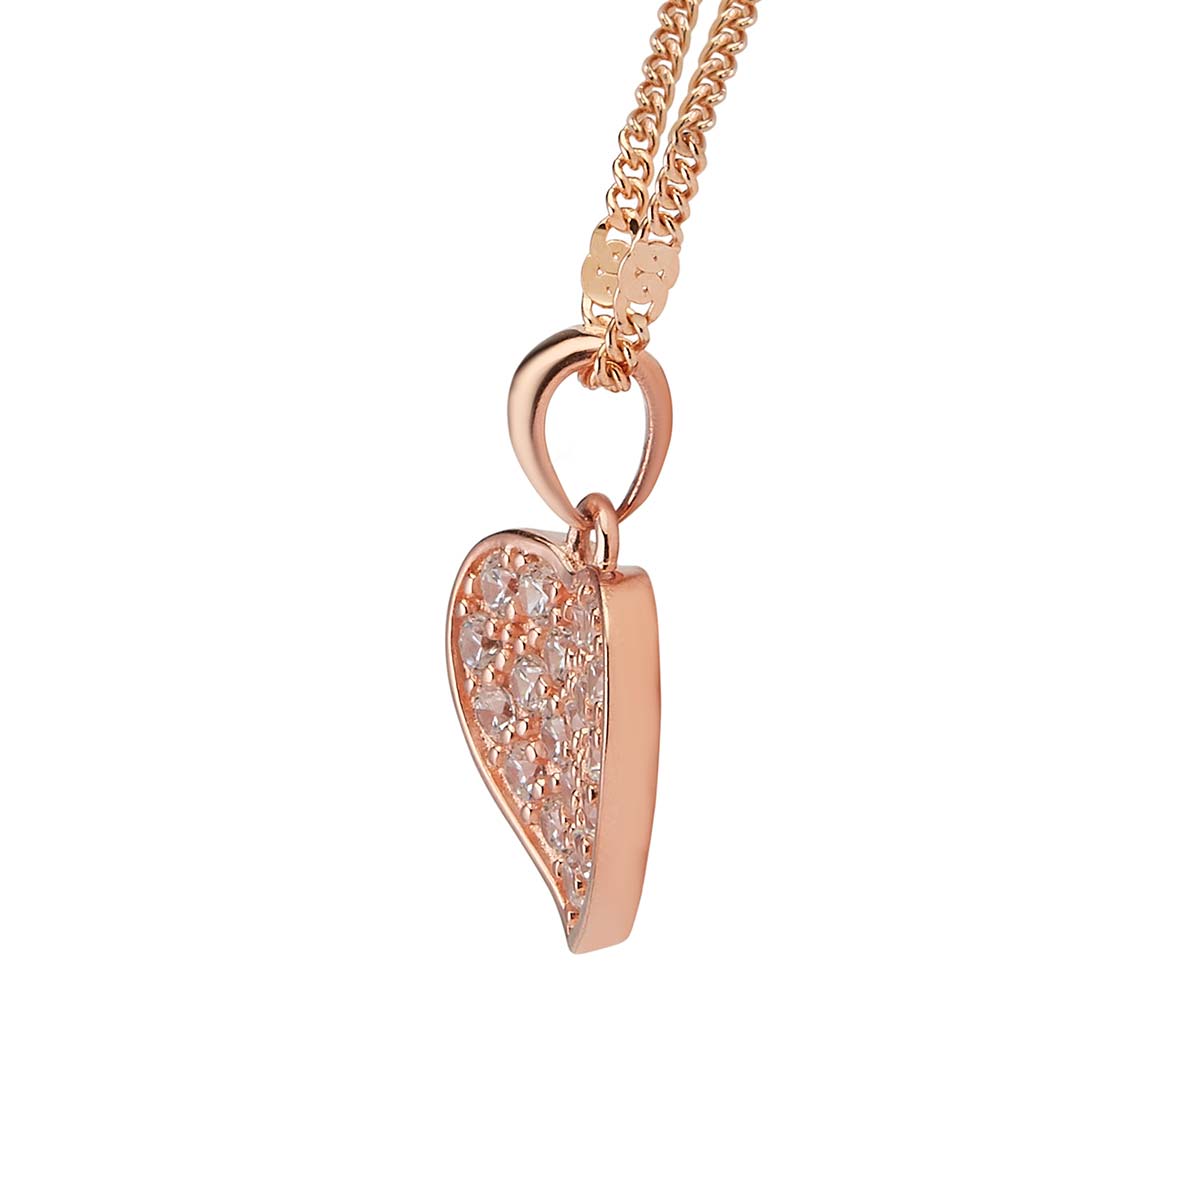 Rose Gold Whole Heart Pendant Set with Link Chain